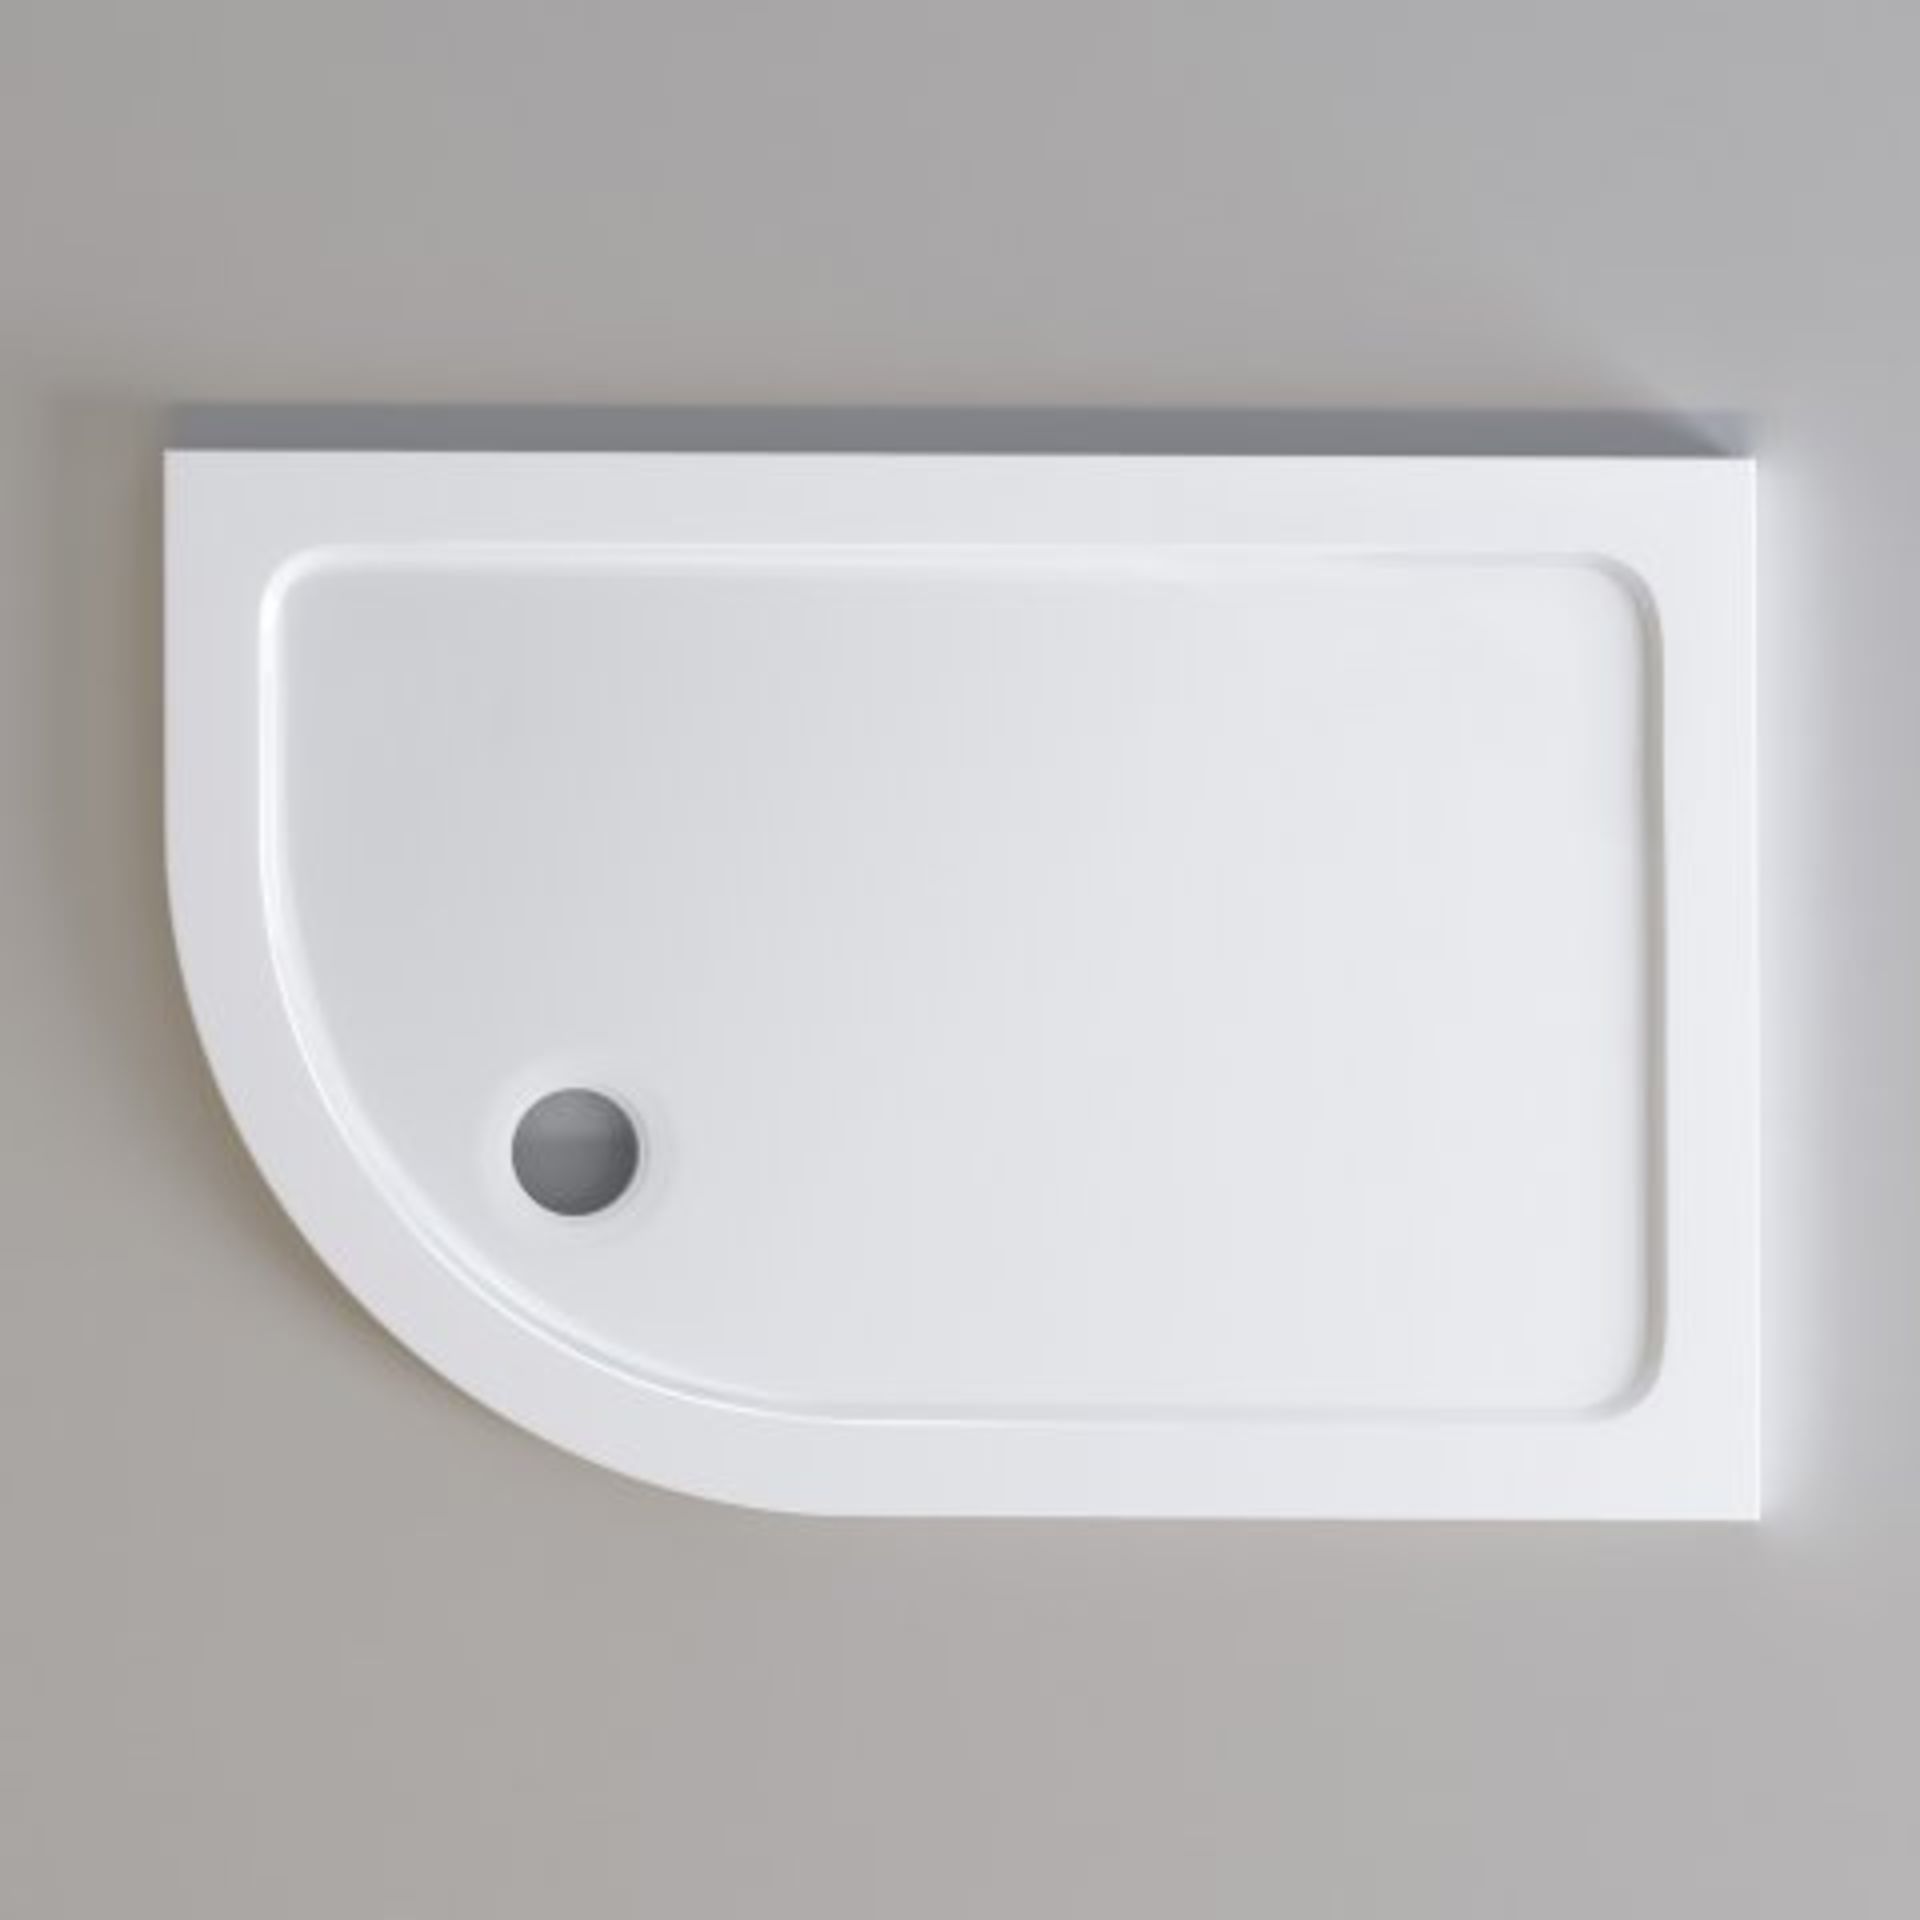 (H226) 1200x800mm Offset Quadrant Ultraslim Stone Shower Tray - Left. RRP £299.99. Magnificently - Image 2 of 2